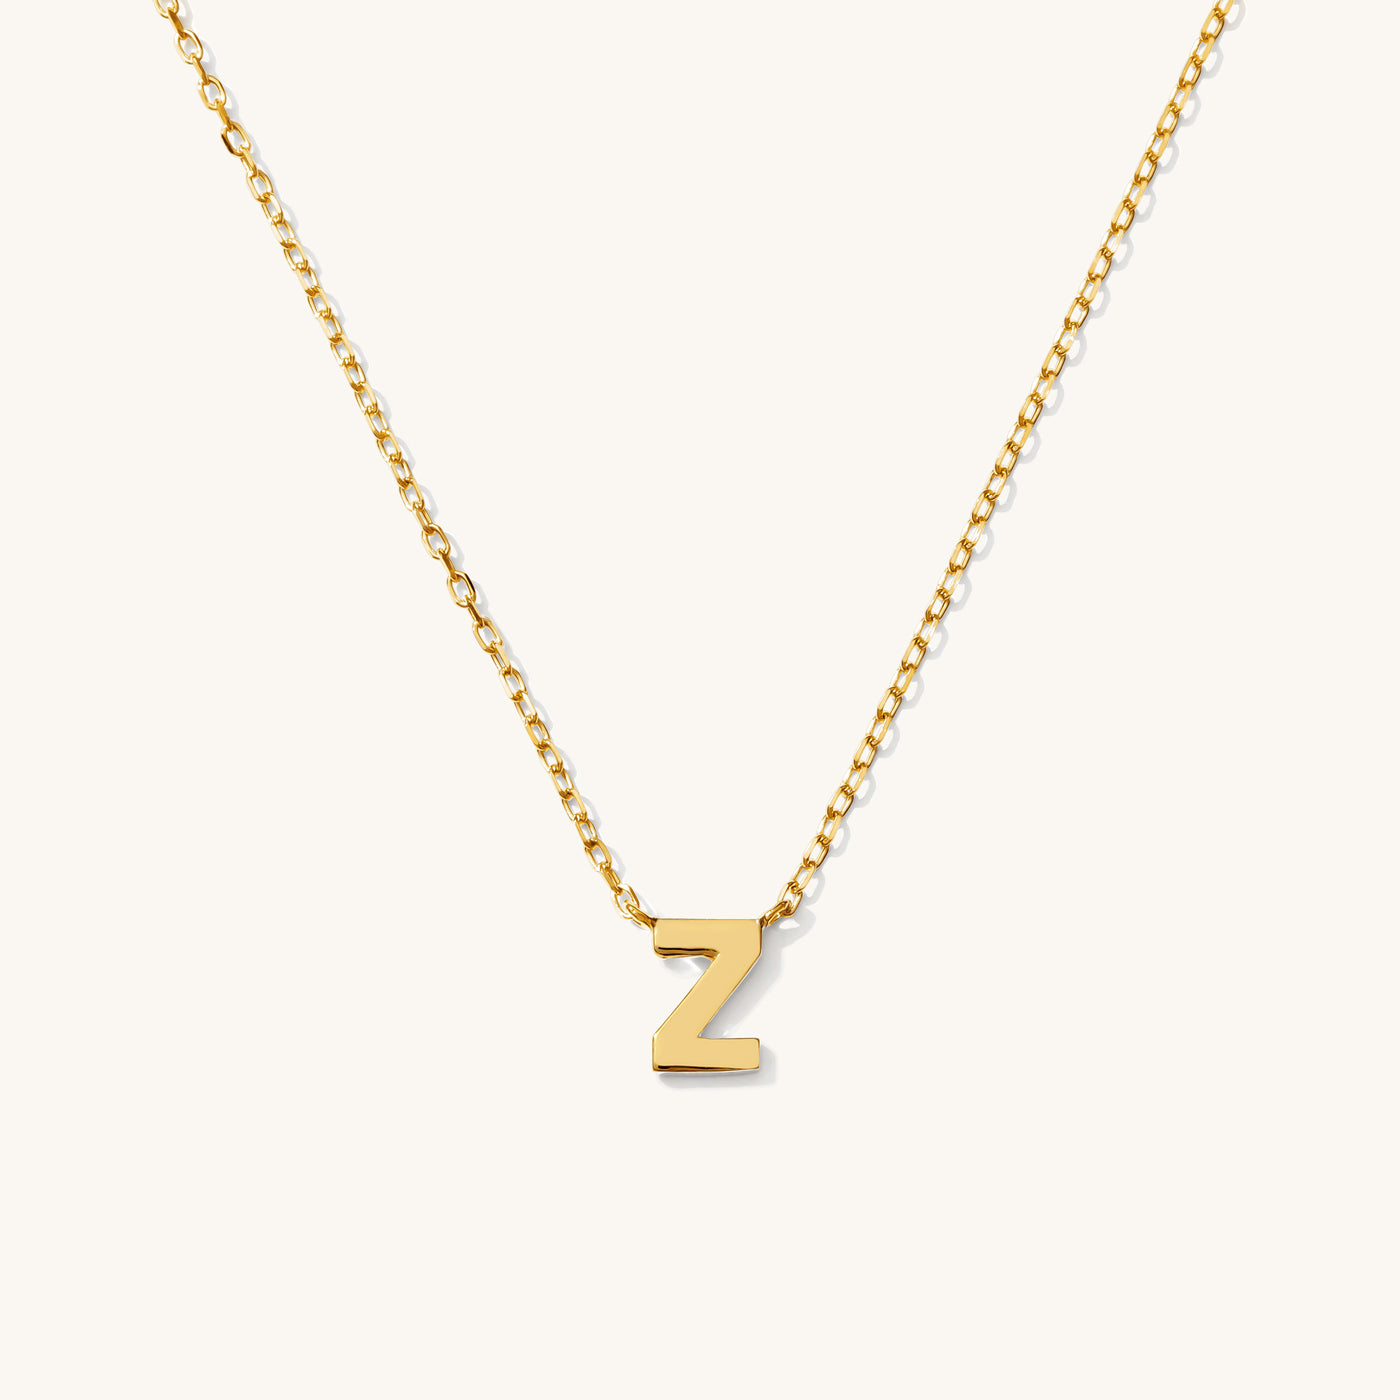 Z Tiny Initial Necklace - 14k Solid Gold